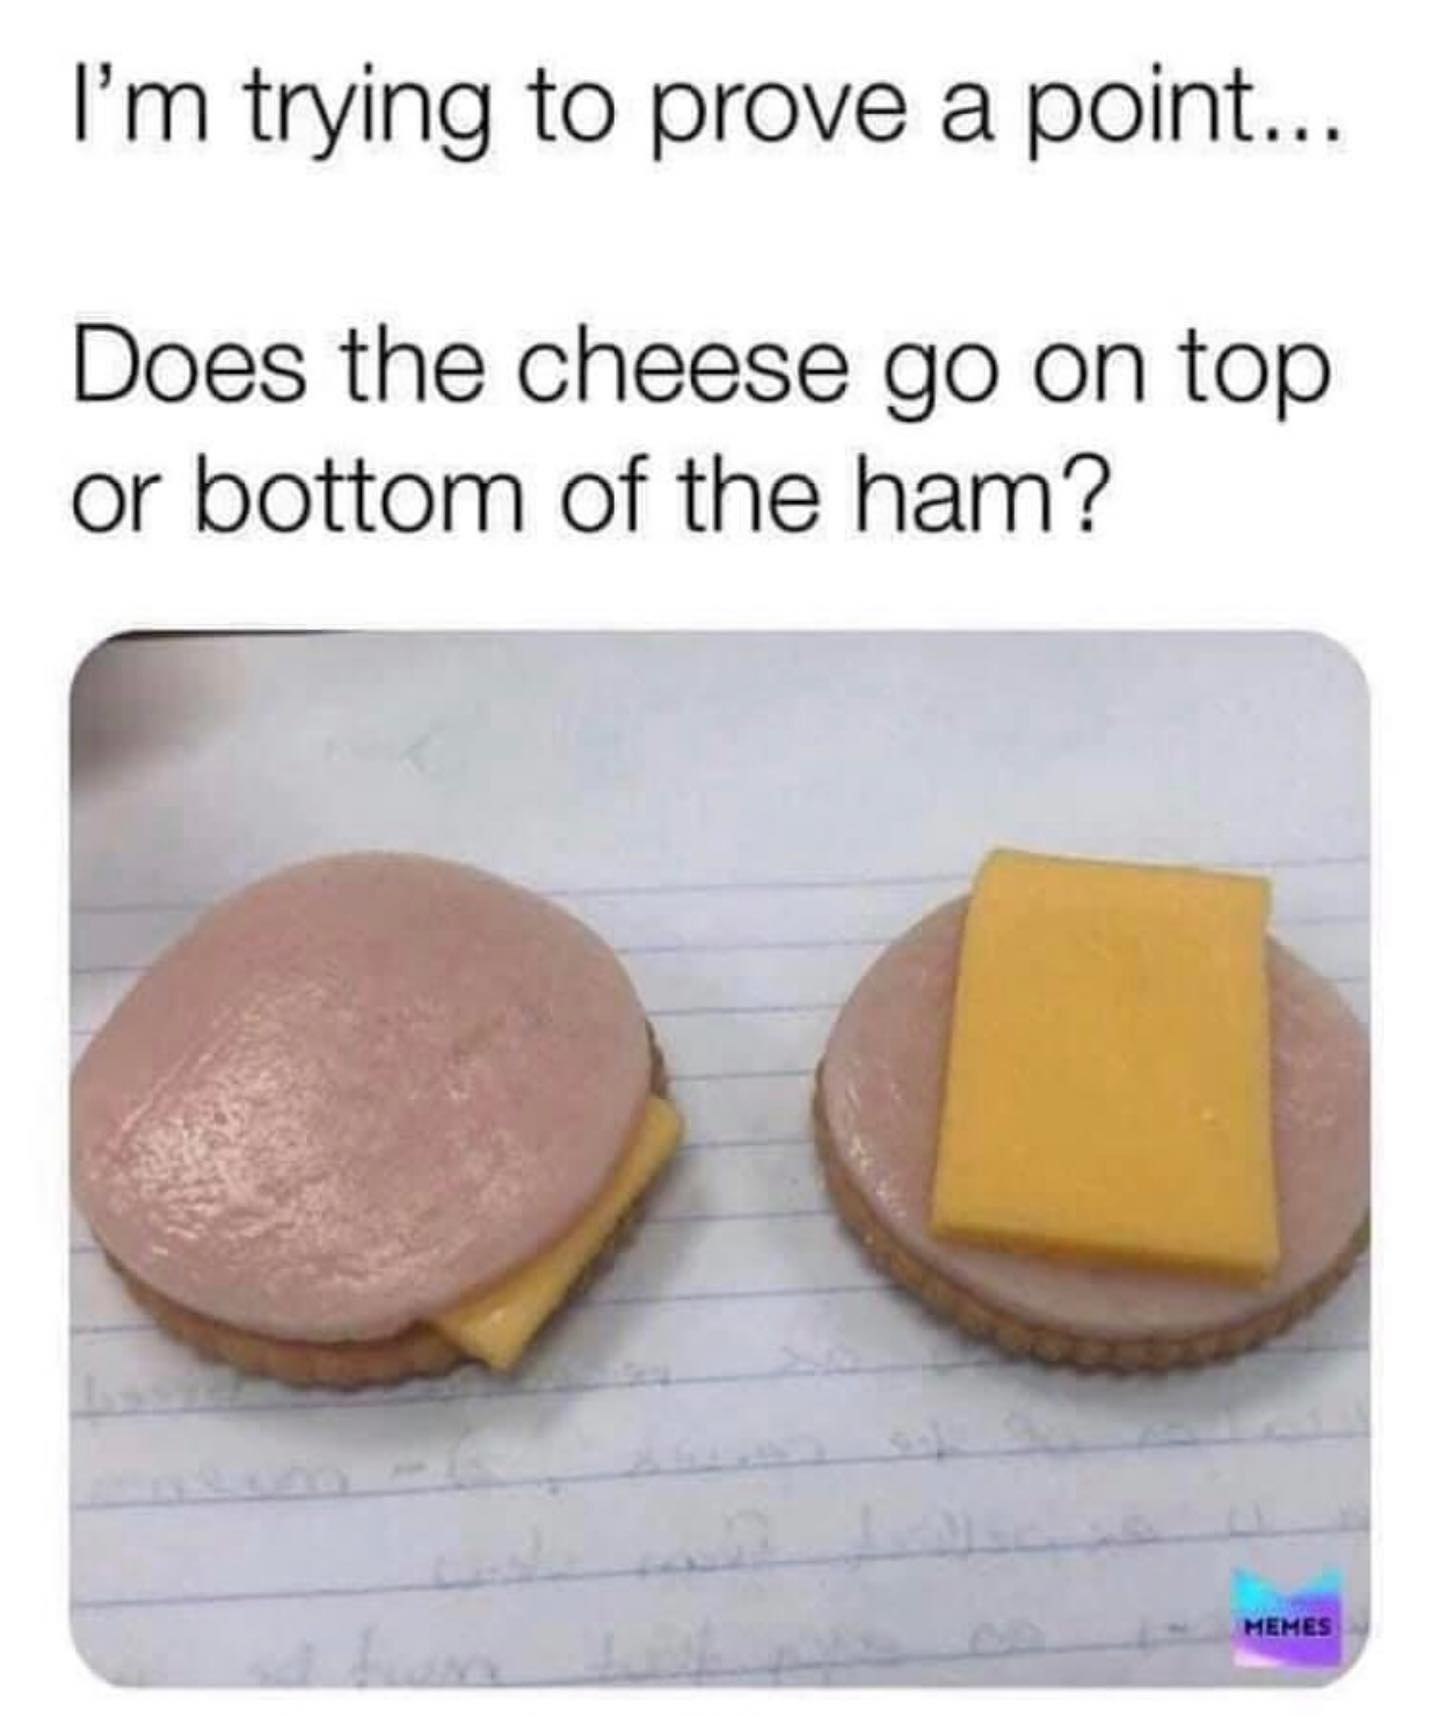 dank memes  I'm trying to prove a point... Does the cheese go on top or bottom of the ham? Memes